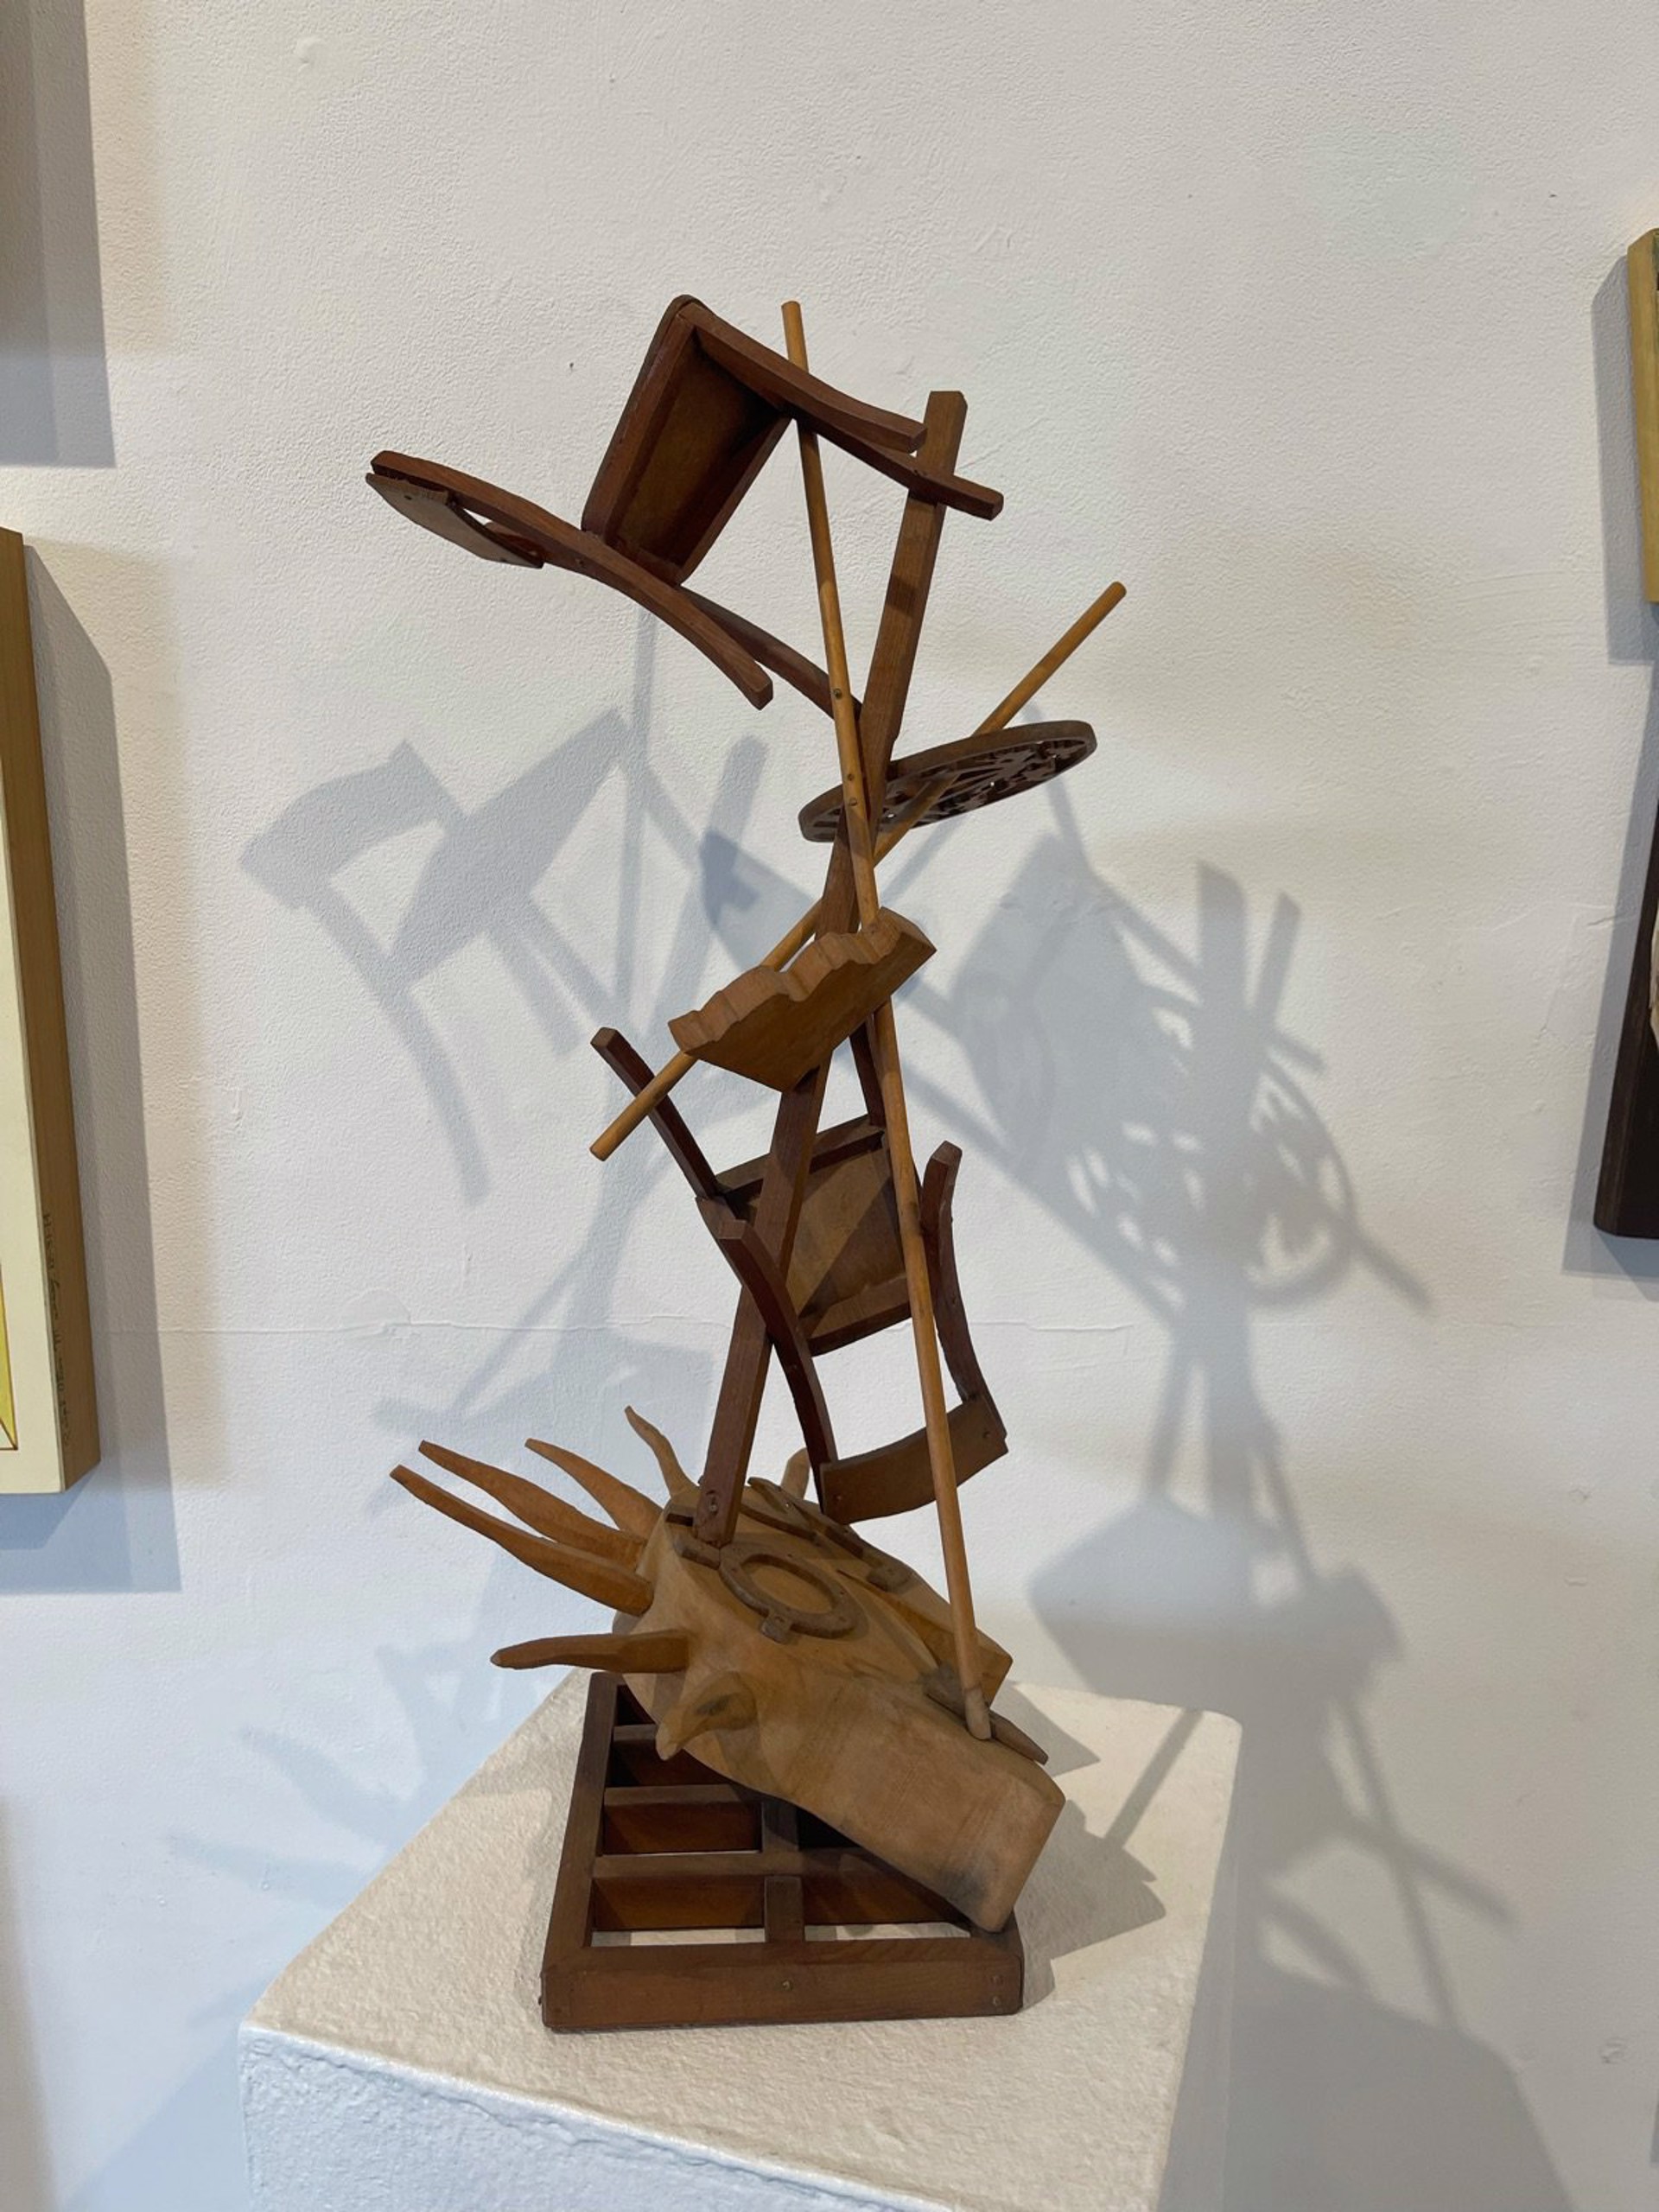 Scale Model (Chairs) by Ralph Allen Massey